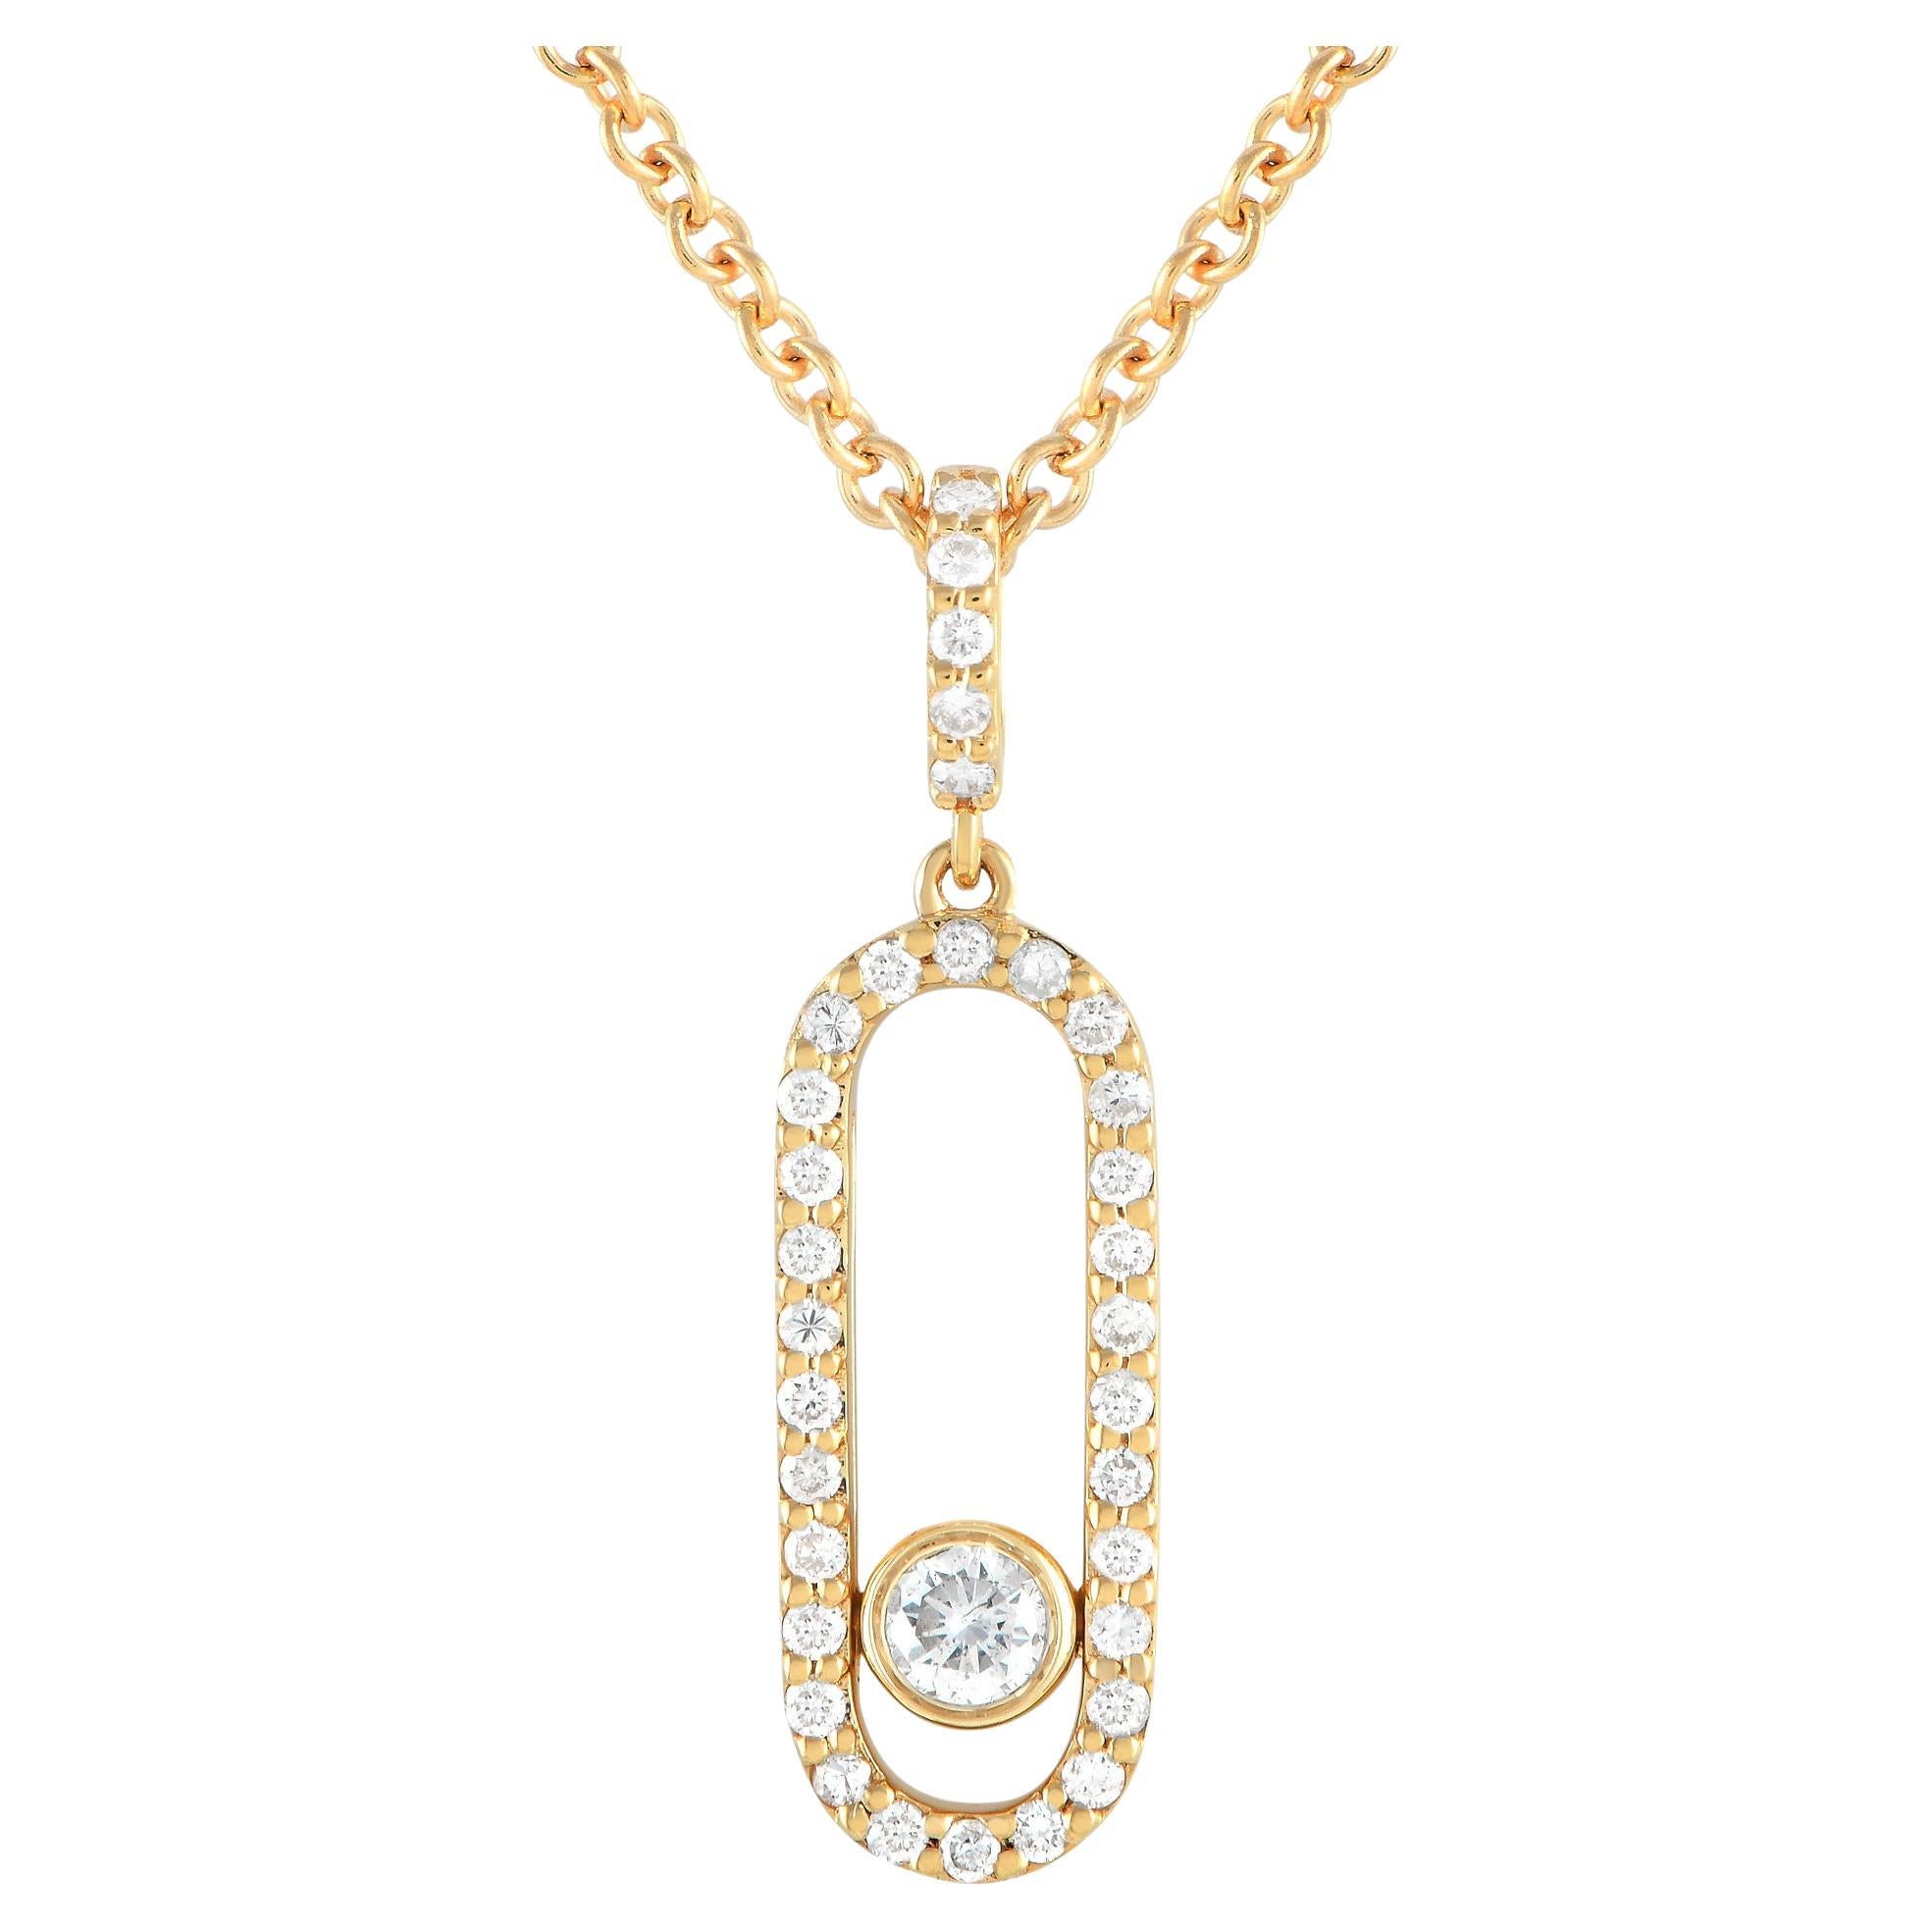 LB Exclusive 18K Yellow Gold 0.32ct Diamond Necklace